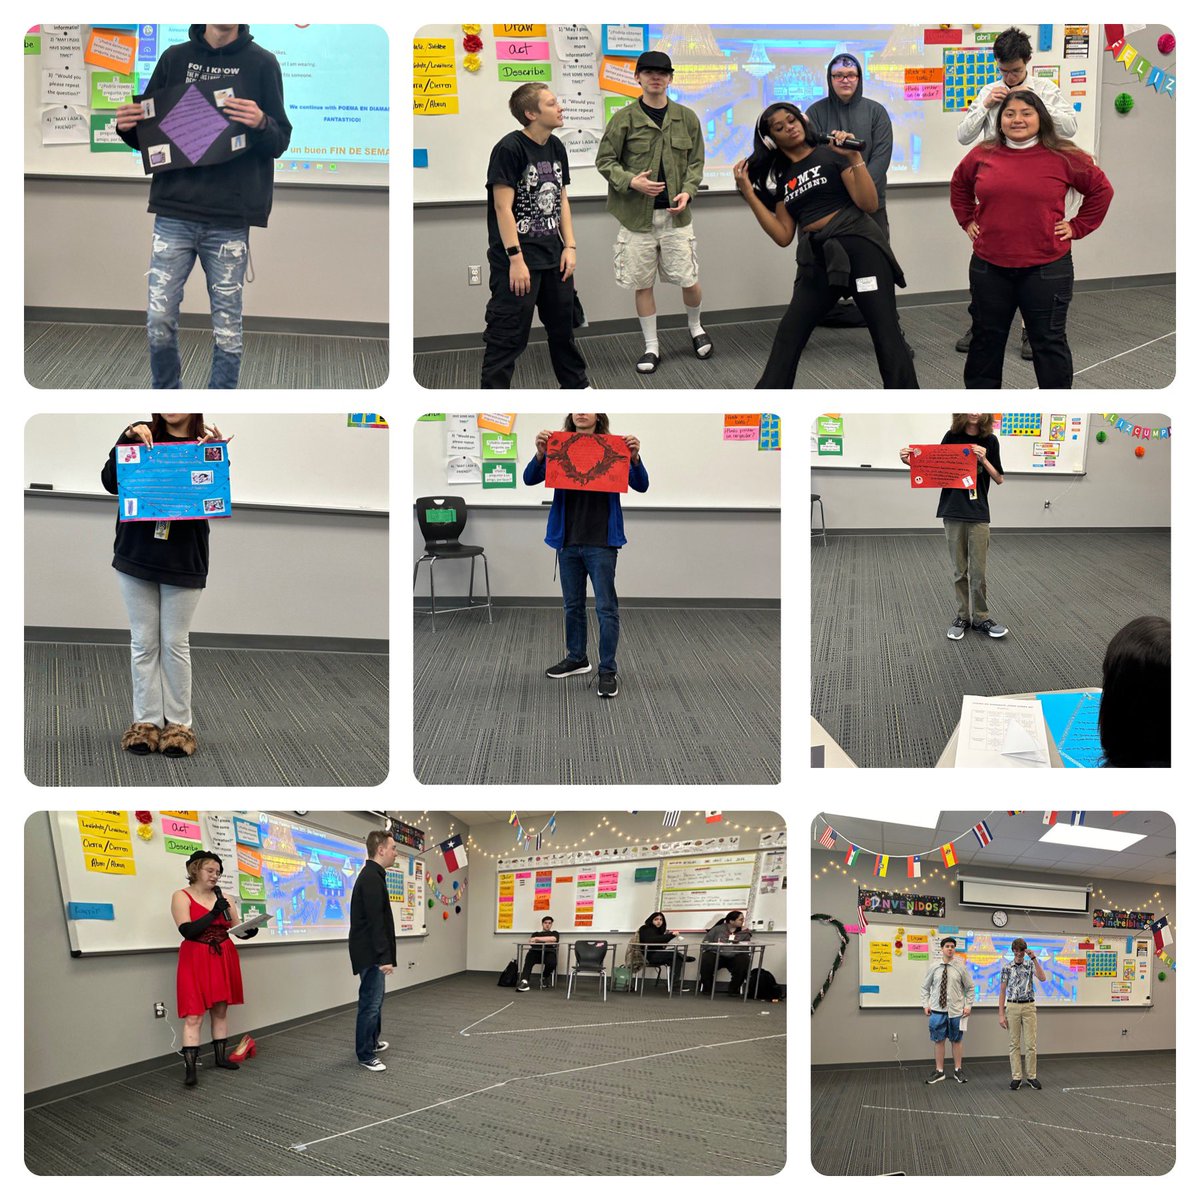 📝 Spanish 1: First poems in Spanish! 🌟 Students wrote about what they like and don’t like! 📝✨

👗 Spanish 2/3: Fashion show fun! Students became designers & models, describing outfits in Spanish! 👠🎬 #SpanishClass #FunLearning